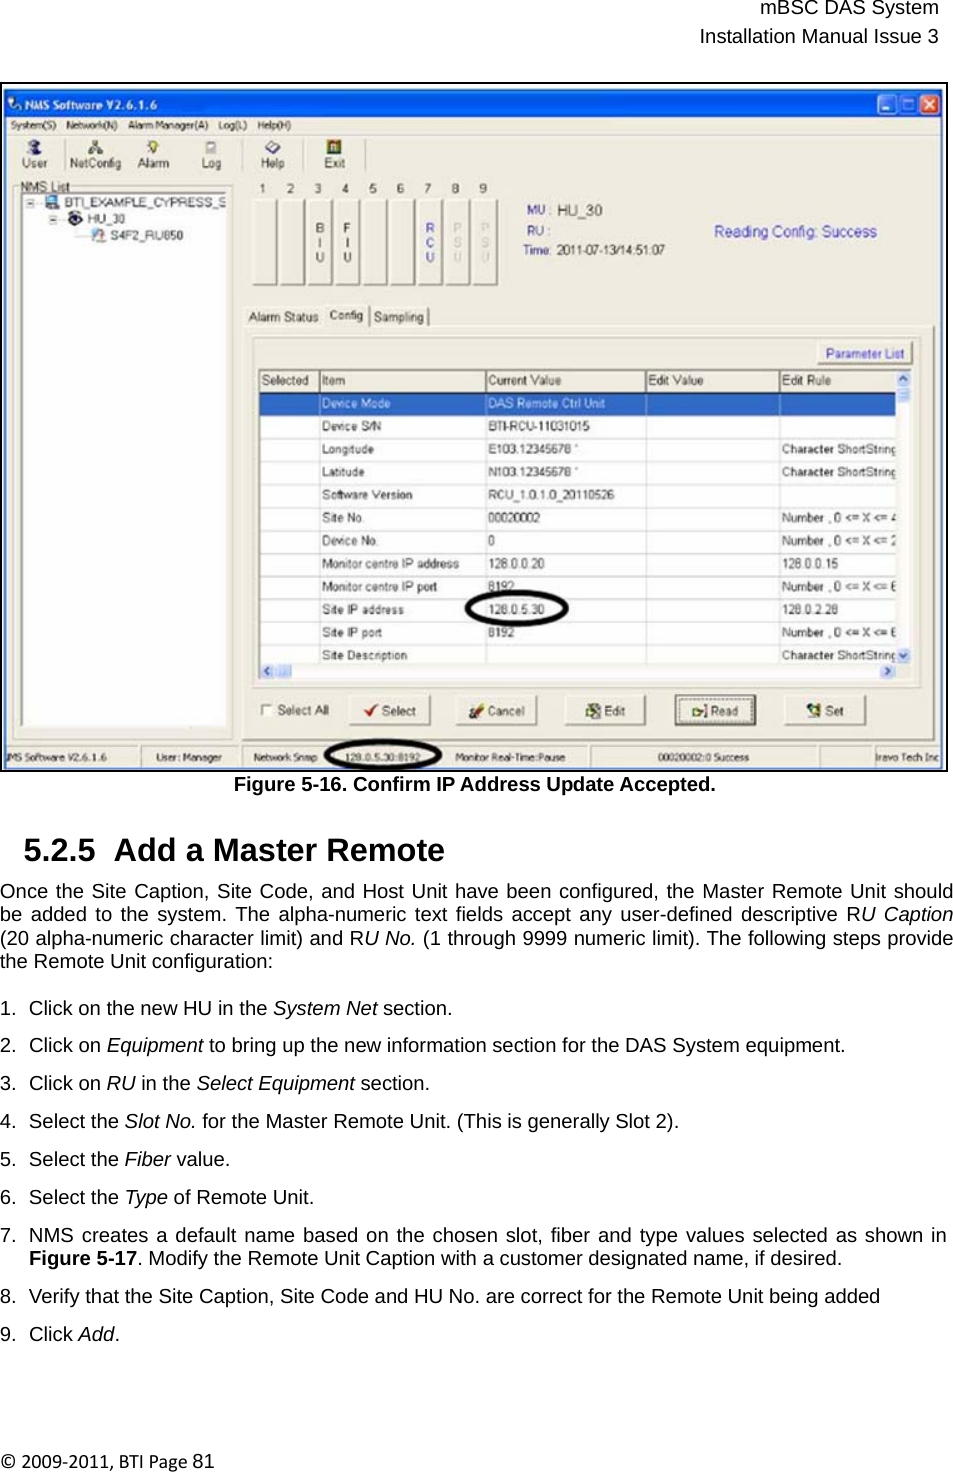 mBSC DAS SystemInstallation Manual Issue 3©2009‐2011,BTIPage81                                    Figure 5-16. Confirm IP Address Update Accepted.   5.2.5  Add a Master Remote  Once the Site Caption, Site Code, and Host Unit have been configured, the Master Remote Unit should be added to the system. The alpha-numeric text fields accept any user-defined descriptive RU Caption (20 alpha-numeric character limit) and RU No. (1 through 9999 numeric limit). The following steps provide the Remote Unit configuration:  1.  Click on the new HU in the System Net section.  2.  Click on Equipment to bring up the new information section for the DAS System equipment.  3.  Click on RU in the Select Equipment section.  4.  Select the Slot No. for the Master Remote Unit. (This is generally Slot 2).  5.  Select the Fiber value.  6.  Select the Type of Remote Unit.  7.  NMS creates a default name based on the chosen slot, fiber and type values selected as shown in Figure 5-17. Modify the Remote Unit Caption with a customer designated name, if desired.  8.  Verify that the Site Caption, Site Code and HU No. are correct for the Remote Unit being added  9.  Click Add. 